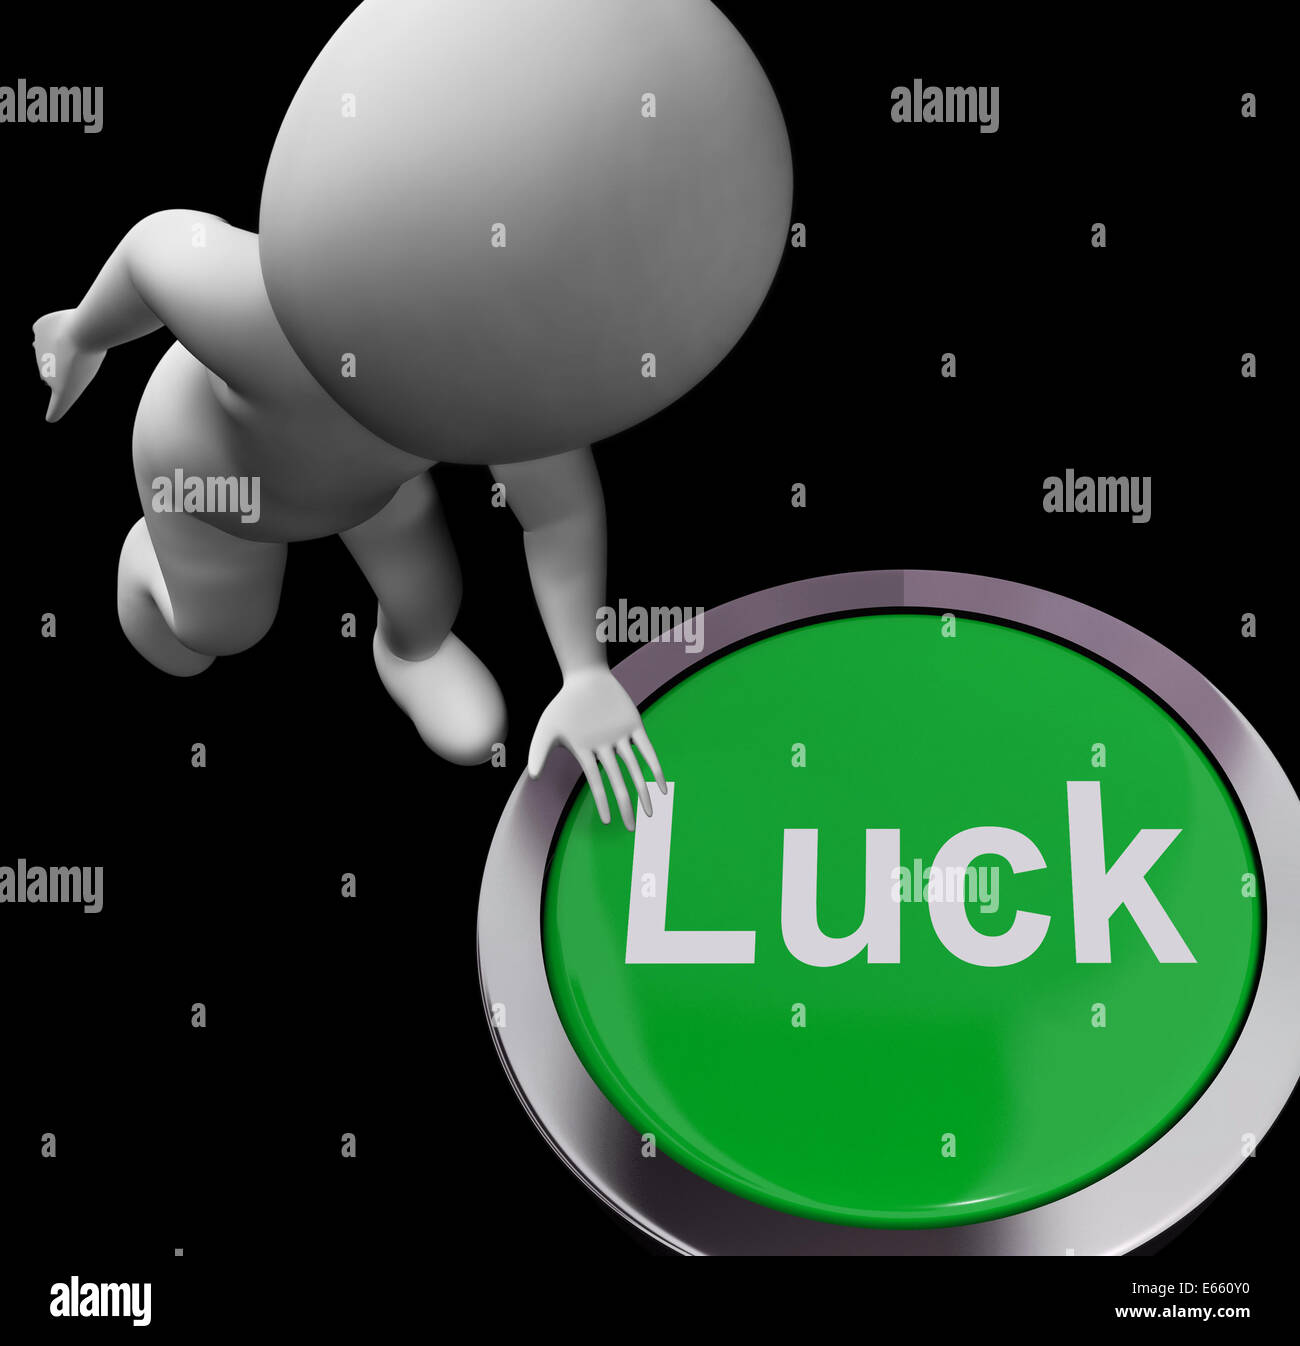 Luck Button Showing Chance Gamble Or Fortunate Stock Photo